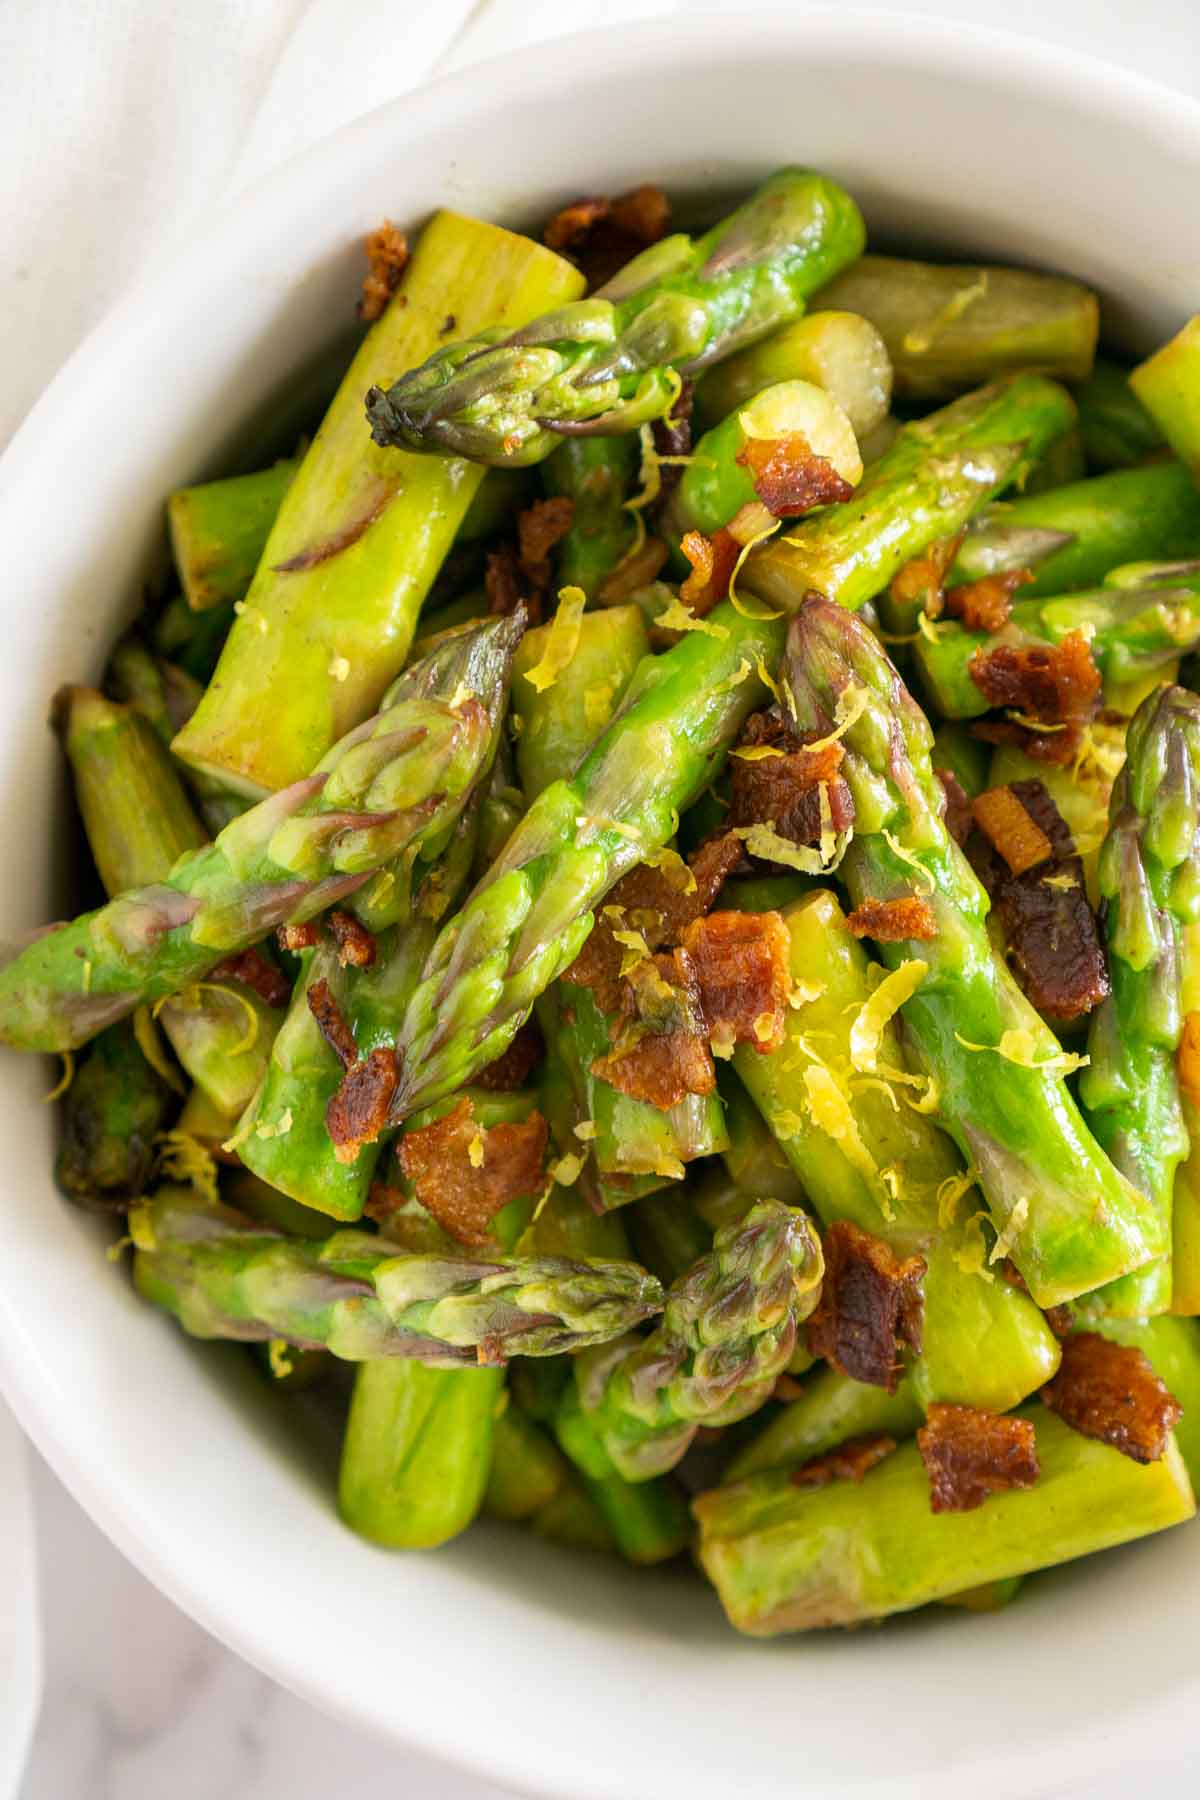 Bowl of cooked asparagus with bacon and lemon zest